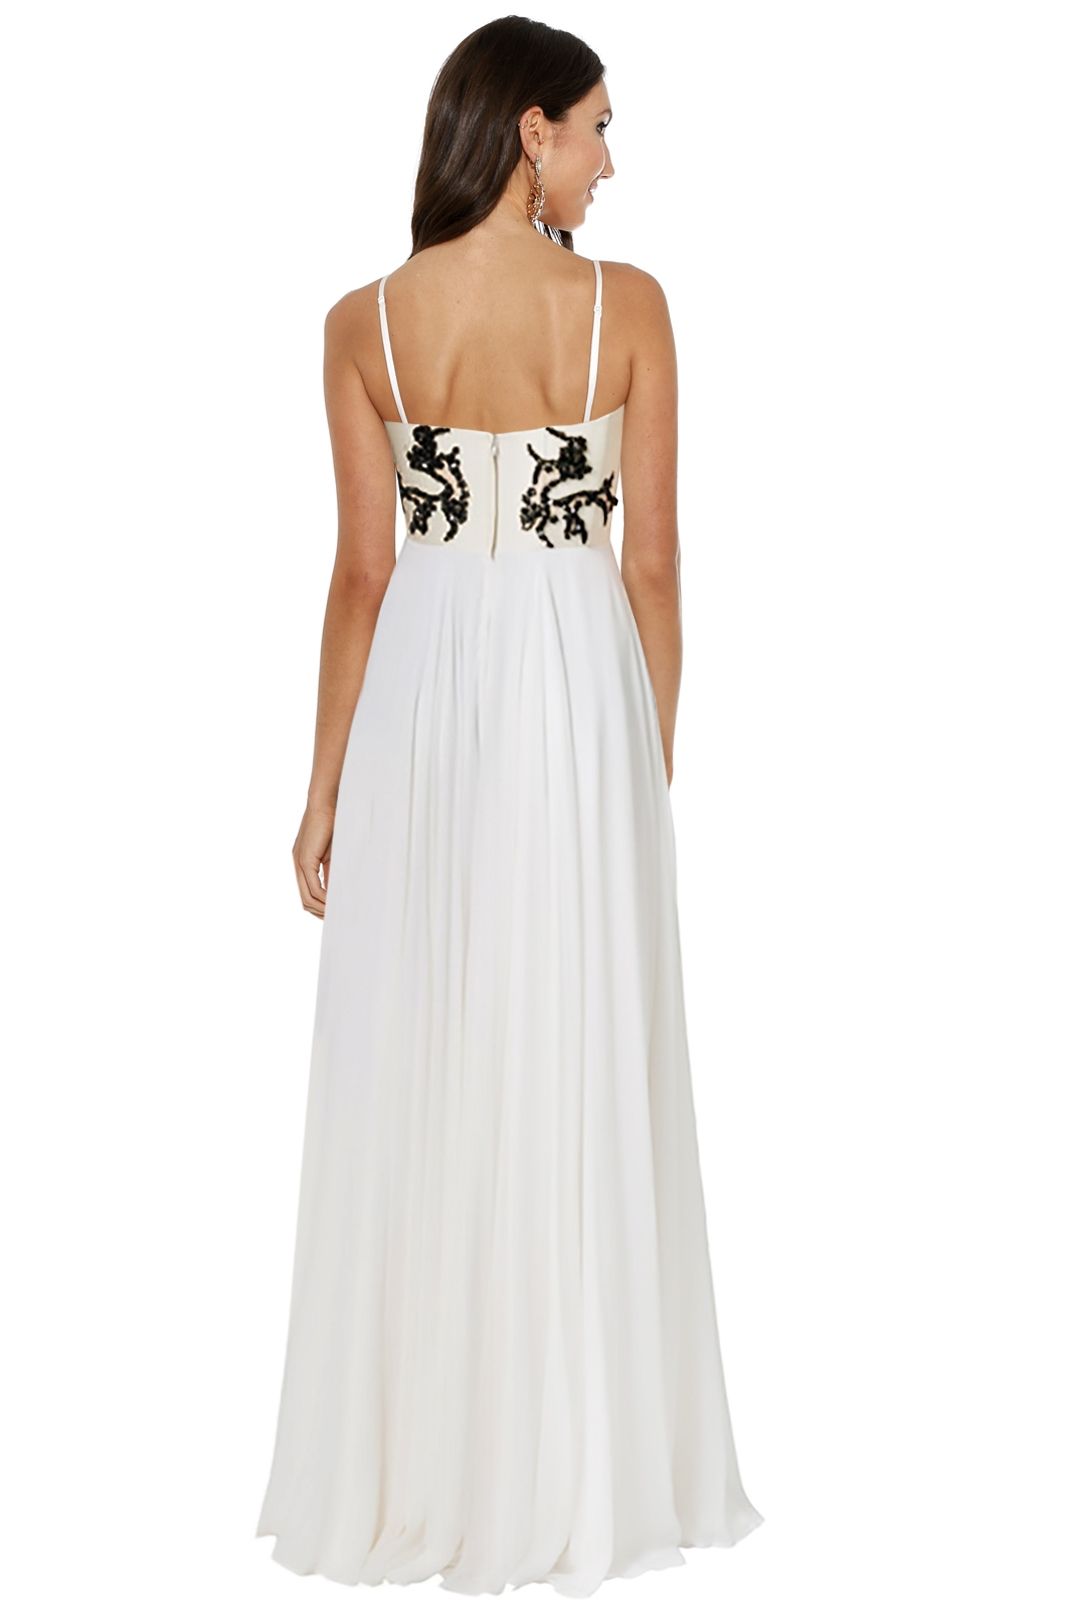 Alex Perry - Minerva Gown - White - Back